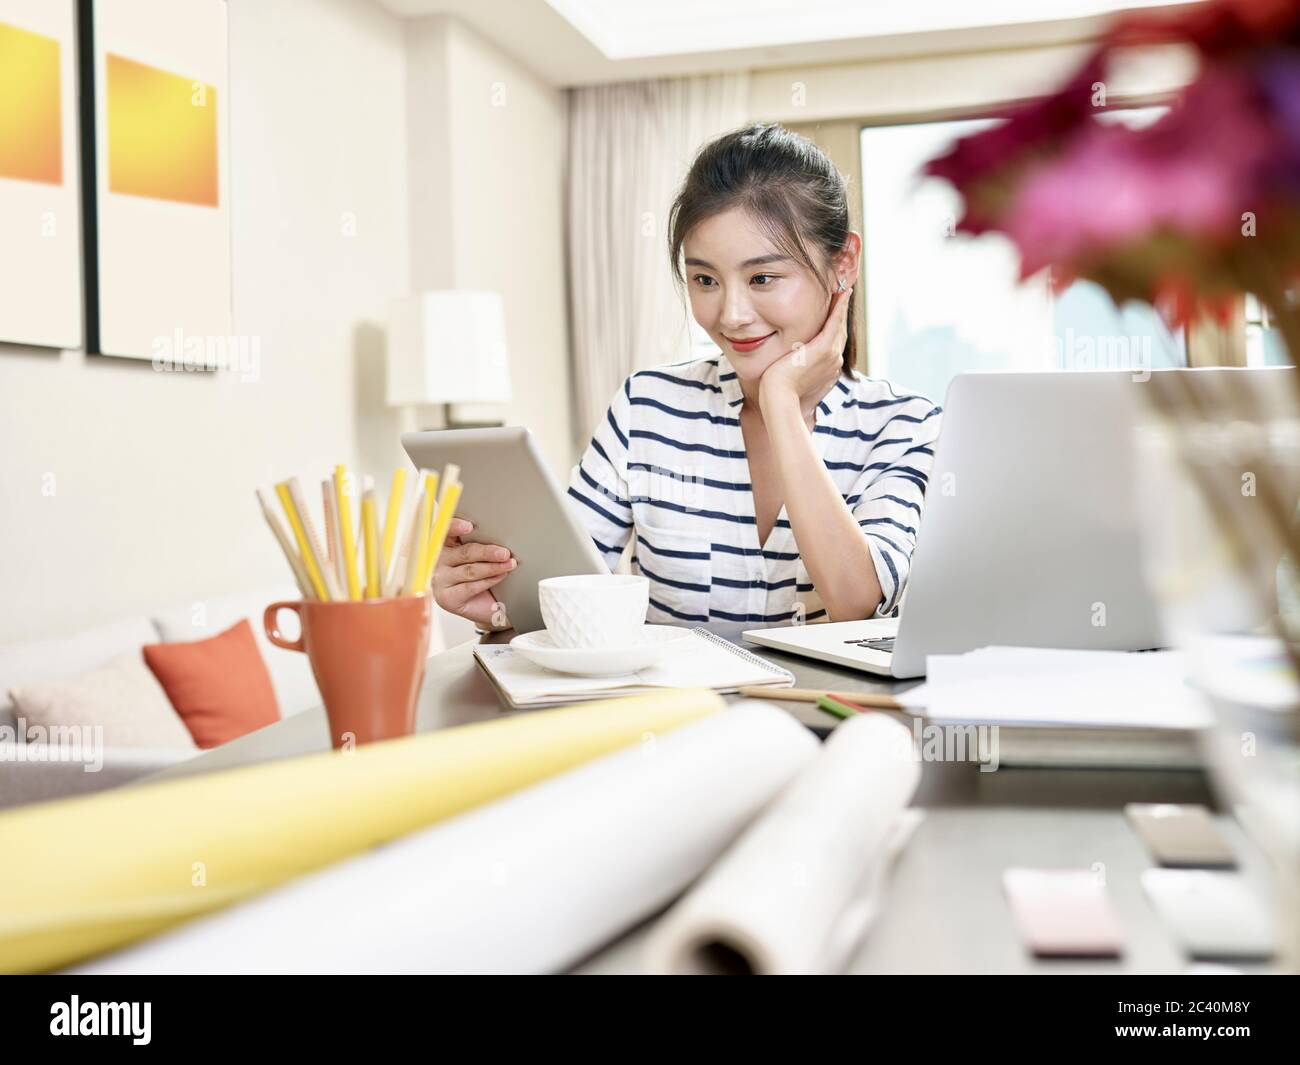 young asian business woman working at home using laptop computer and digital tablet (artwork in background digitally altered) Stock Photo